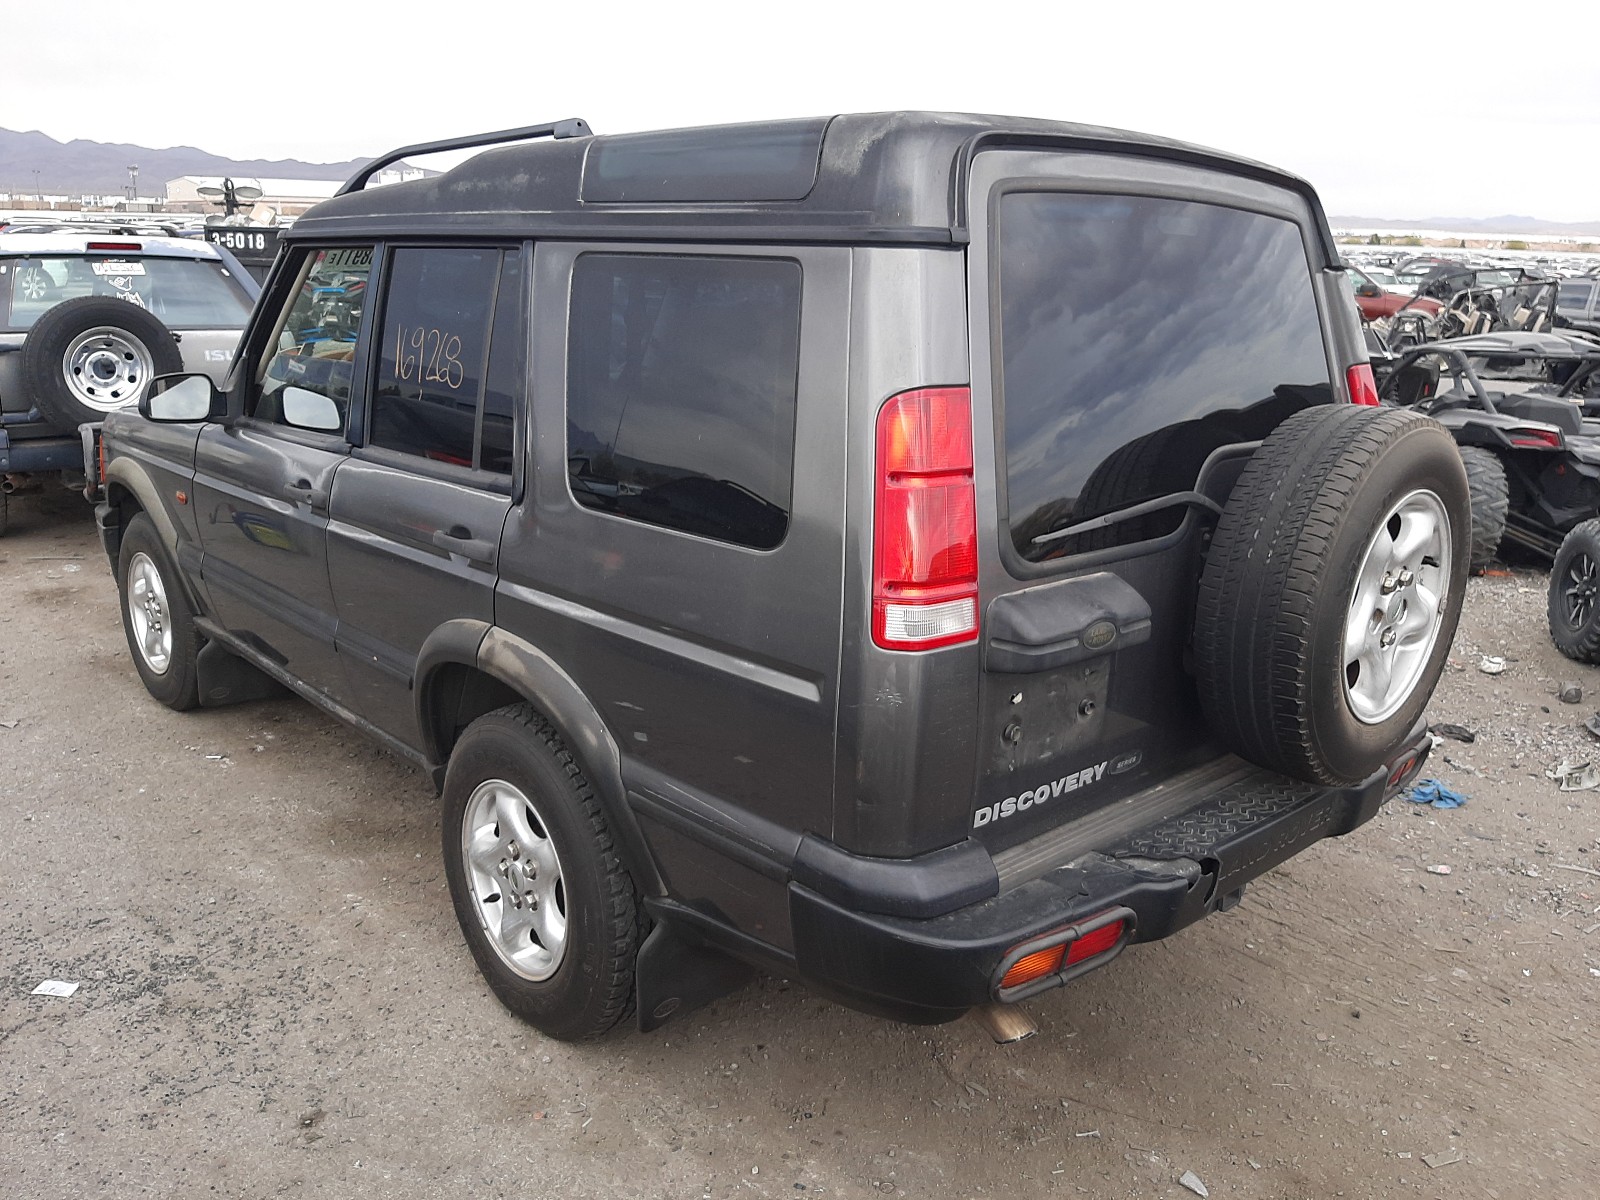 2002 LAND ROVER DISCOVERY II SE for Sale | NV - LAS VEGAS | Thu. Apr 08, 2021 - Used & Salvage Land Rover Discovery For Sale Las Vegas